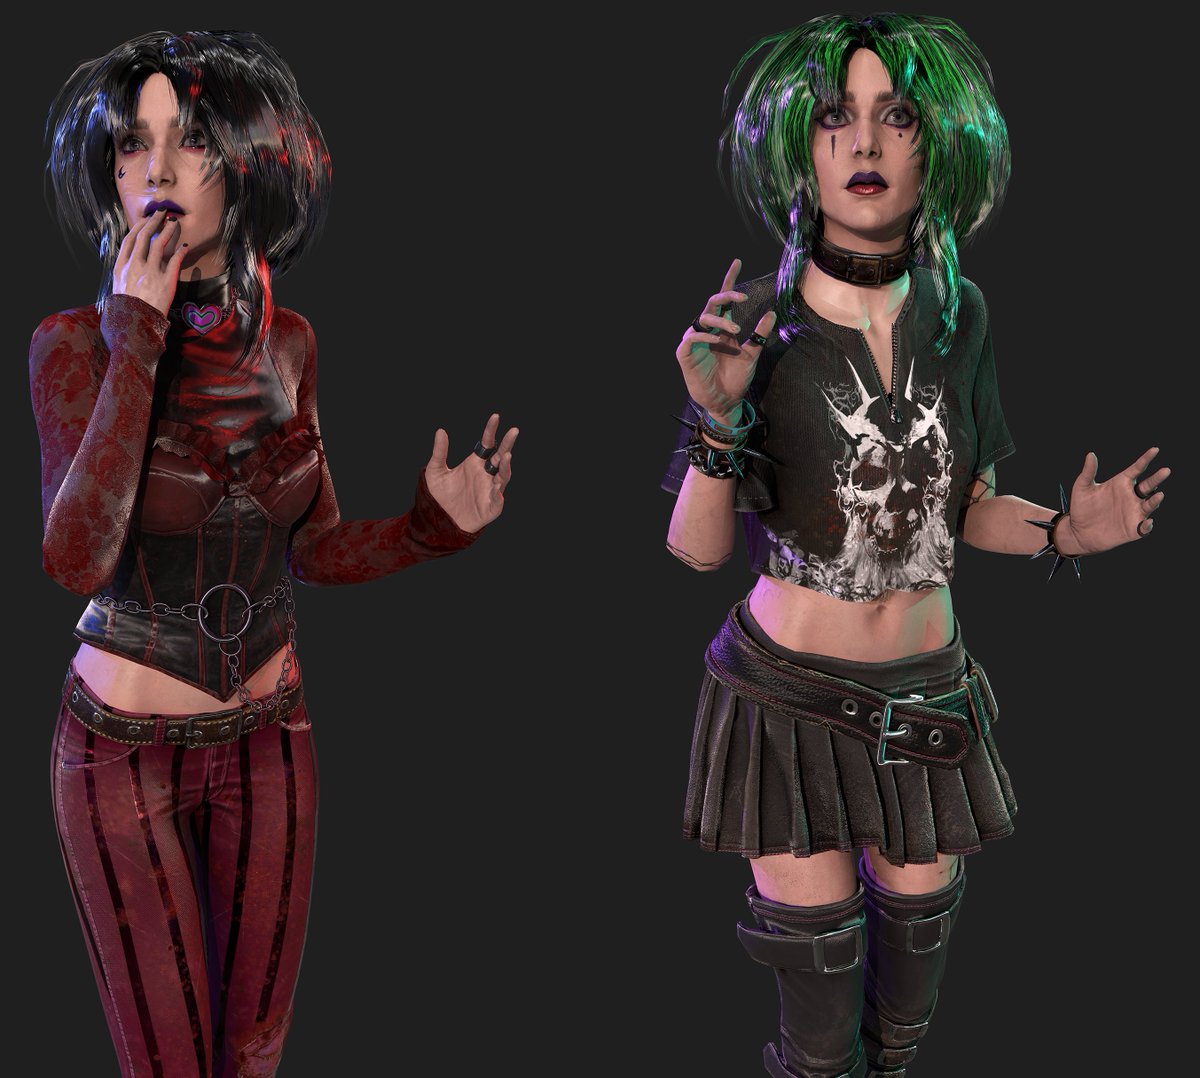 Sable Ward renders cause I wanted to see what this hair would look like in different colors